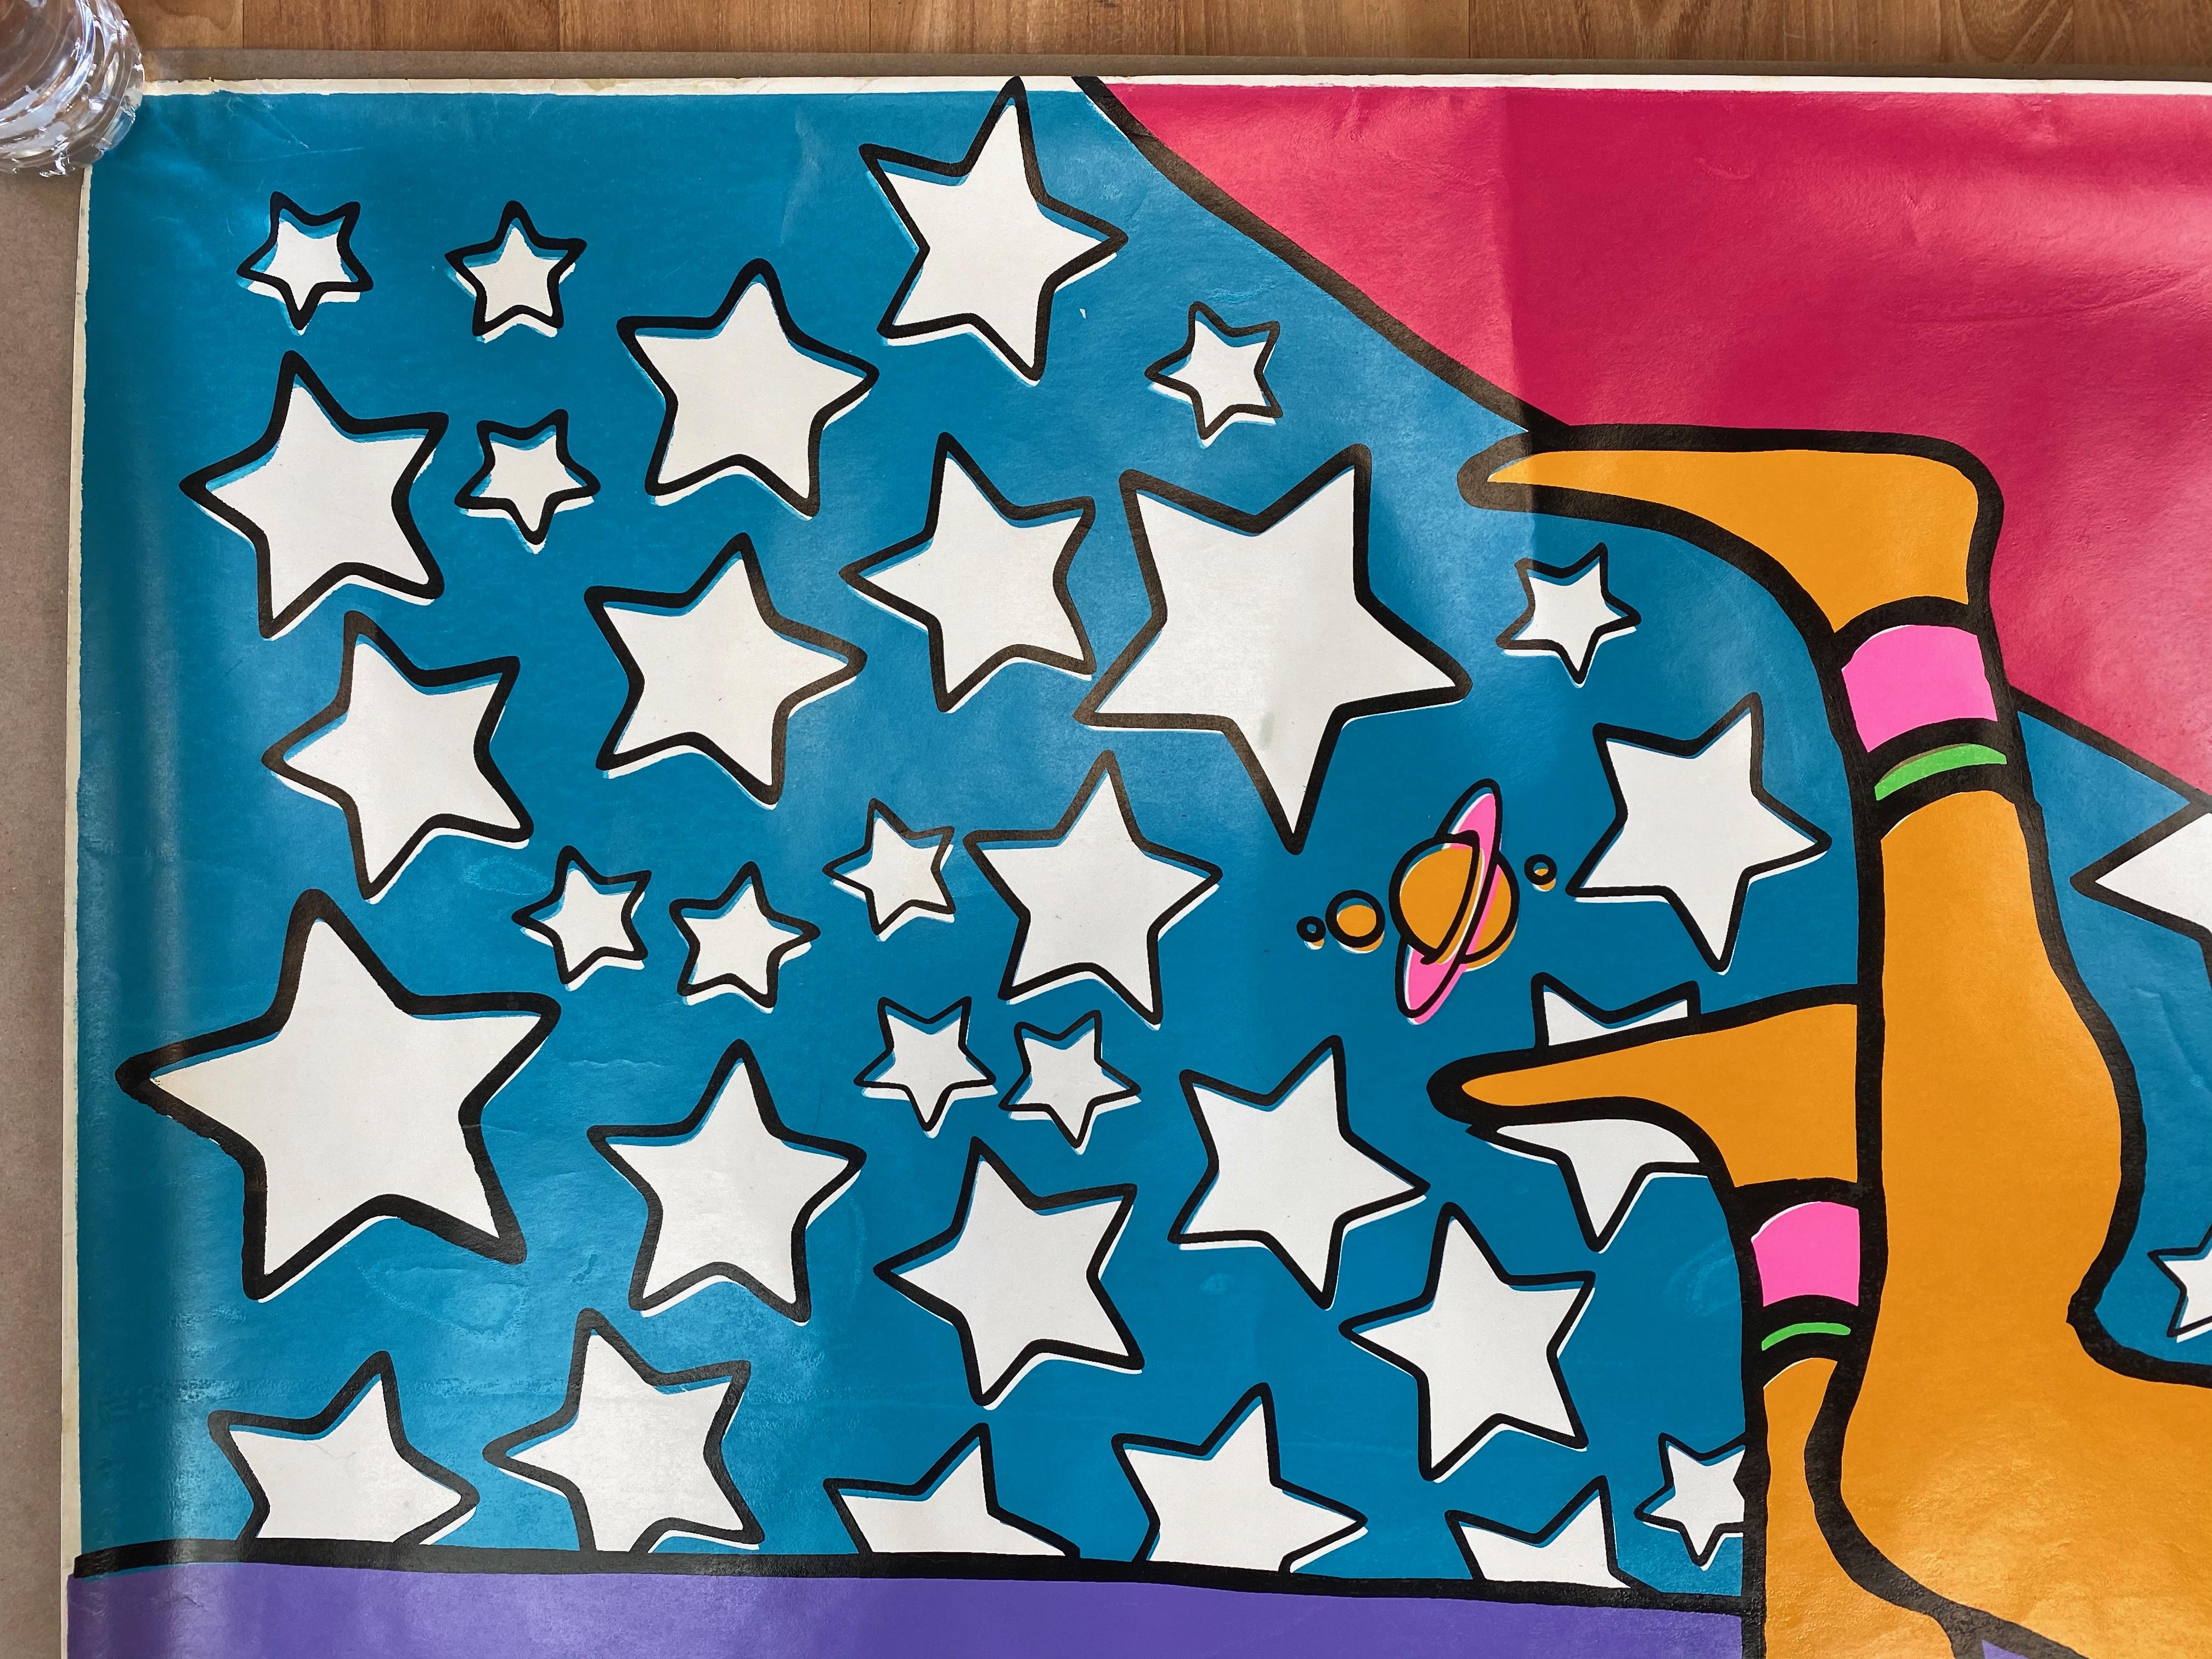 American Peter Max 12-Foot-Wide Serigraph for 1970 de Young Museum Solo Exhibition ‘A’ For Sale